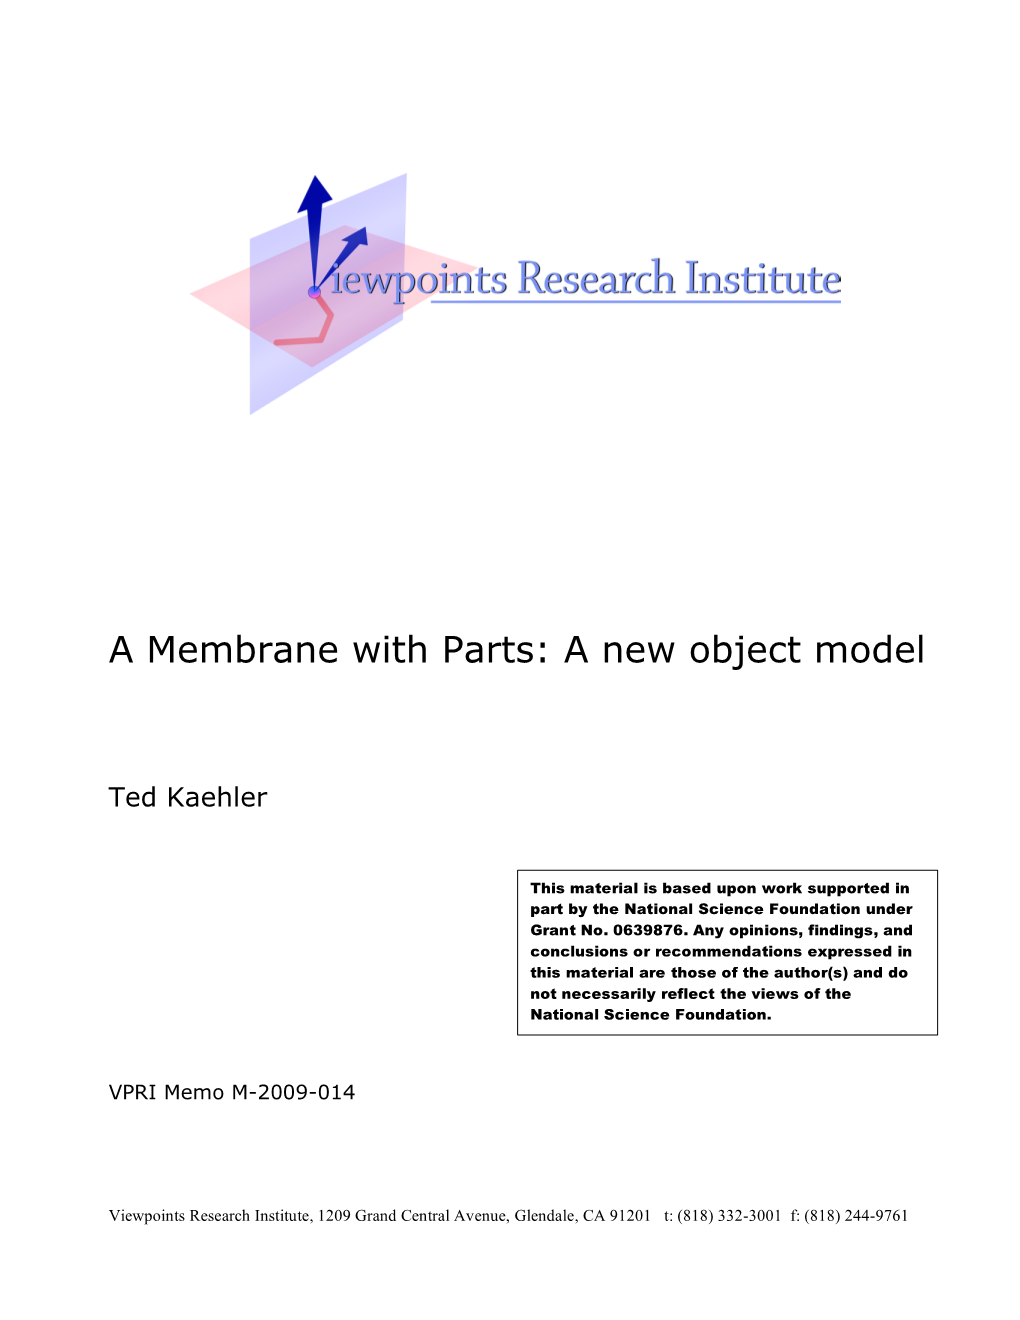 A Membrane with Parts: a New Object Model